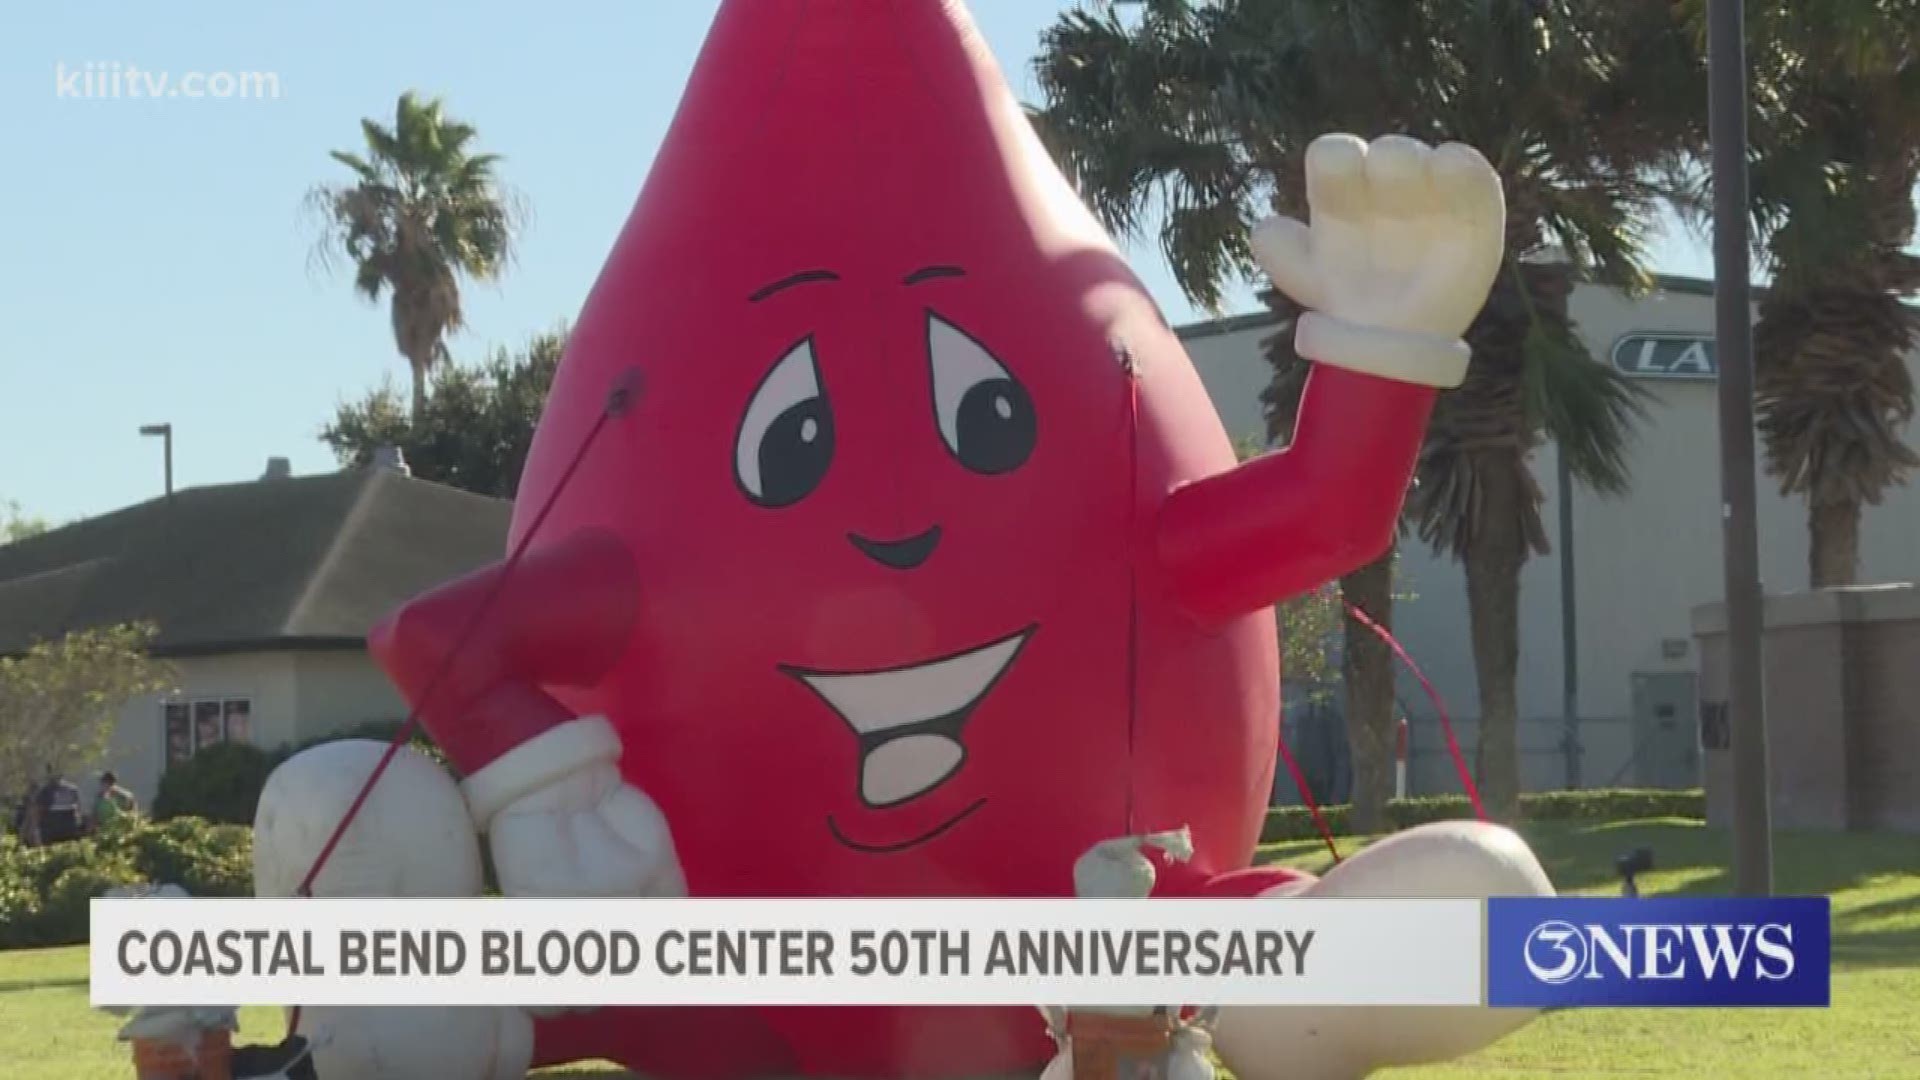 Being the sole provider of blood supply to 10-county service areas, the Coastal Bend Blood Center has a lot to celebrate.